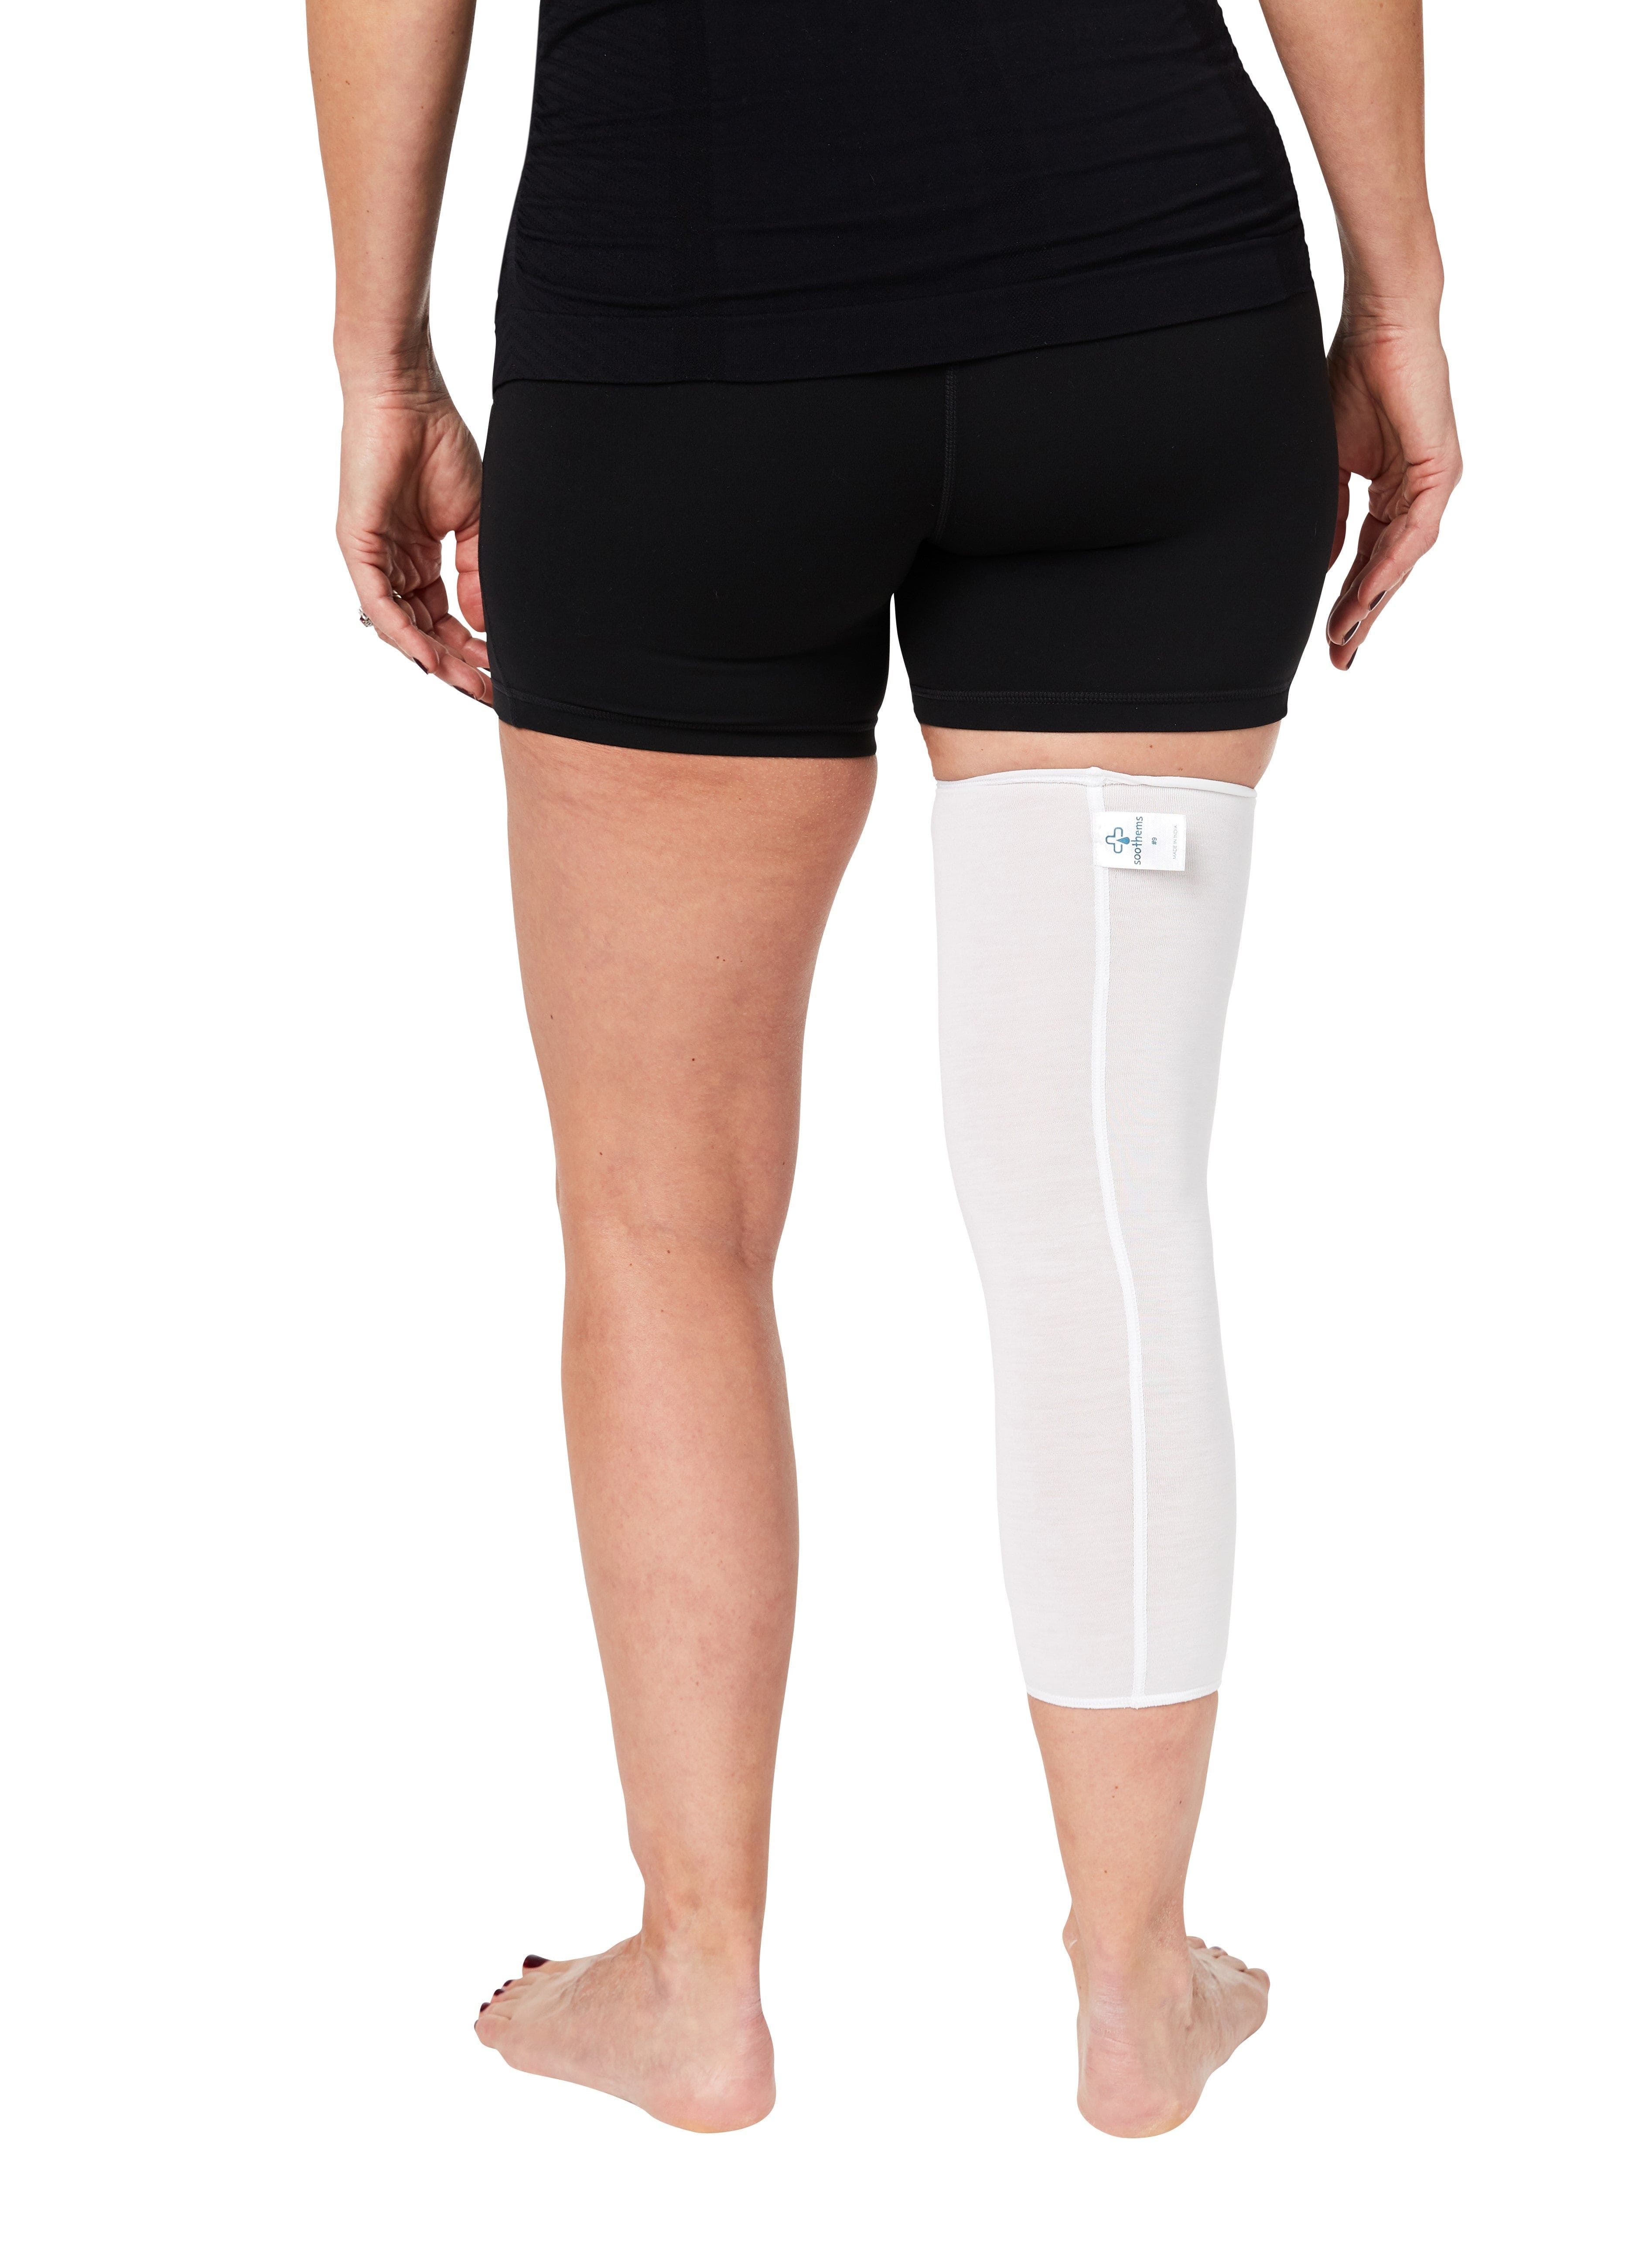 https://www.soothems.com/cdn/shop/products/soothems-eczema-sleeves-for-adults-arm-or-leg-sleeves-for-wet-wrap-therapy-psoriasis-relief-soothems-soothems-5362659196994.jpg?v=1657205290&width=3758